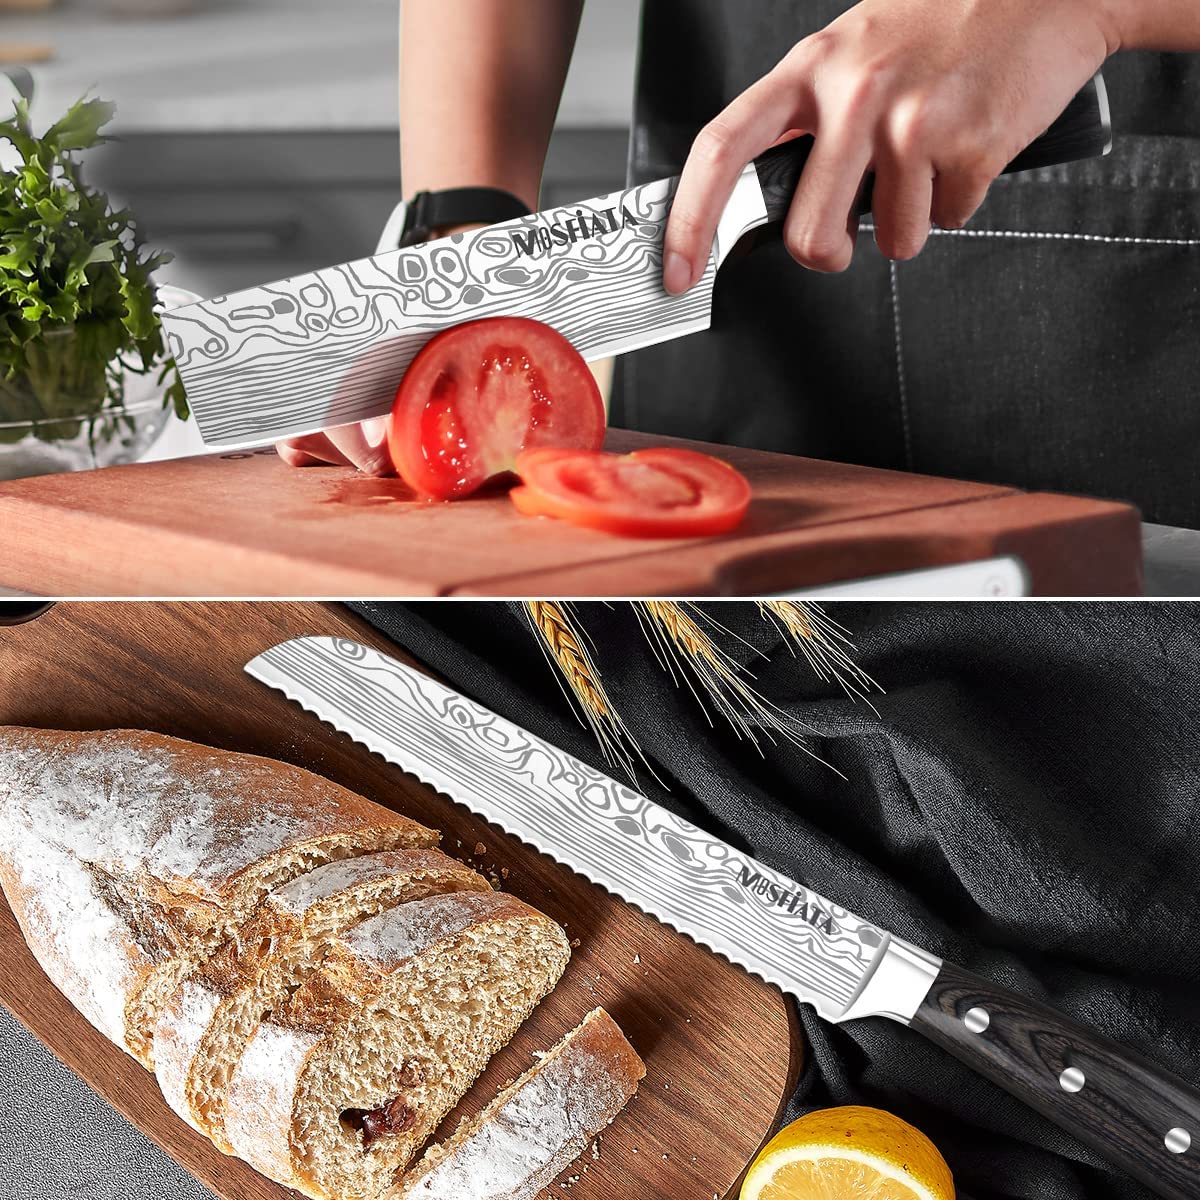  MOSFiATA Chef Knife 8 Inch Kitchen Cooking Knife, 5Cr15Mov High  Carbon Stainless Steel Sharp Knife with Ergonomic Pakkawood Handle, Full  Tang Vegetable Meat Cutting Knife with Sheath for Home Kitchen: Home